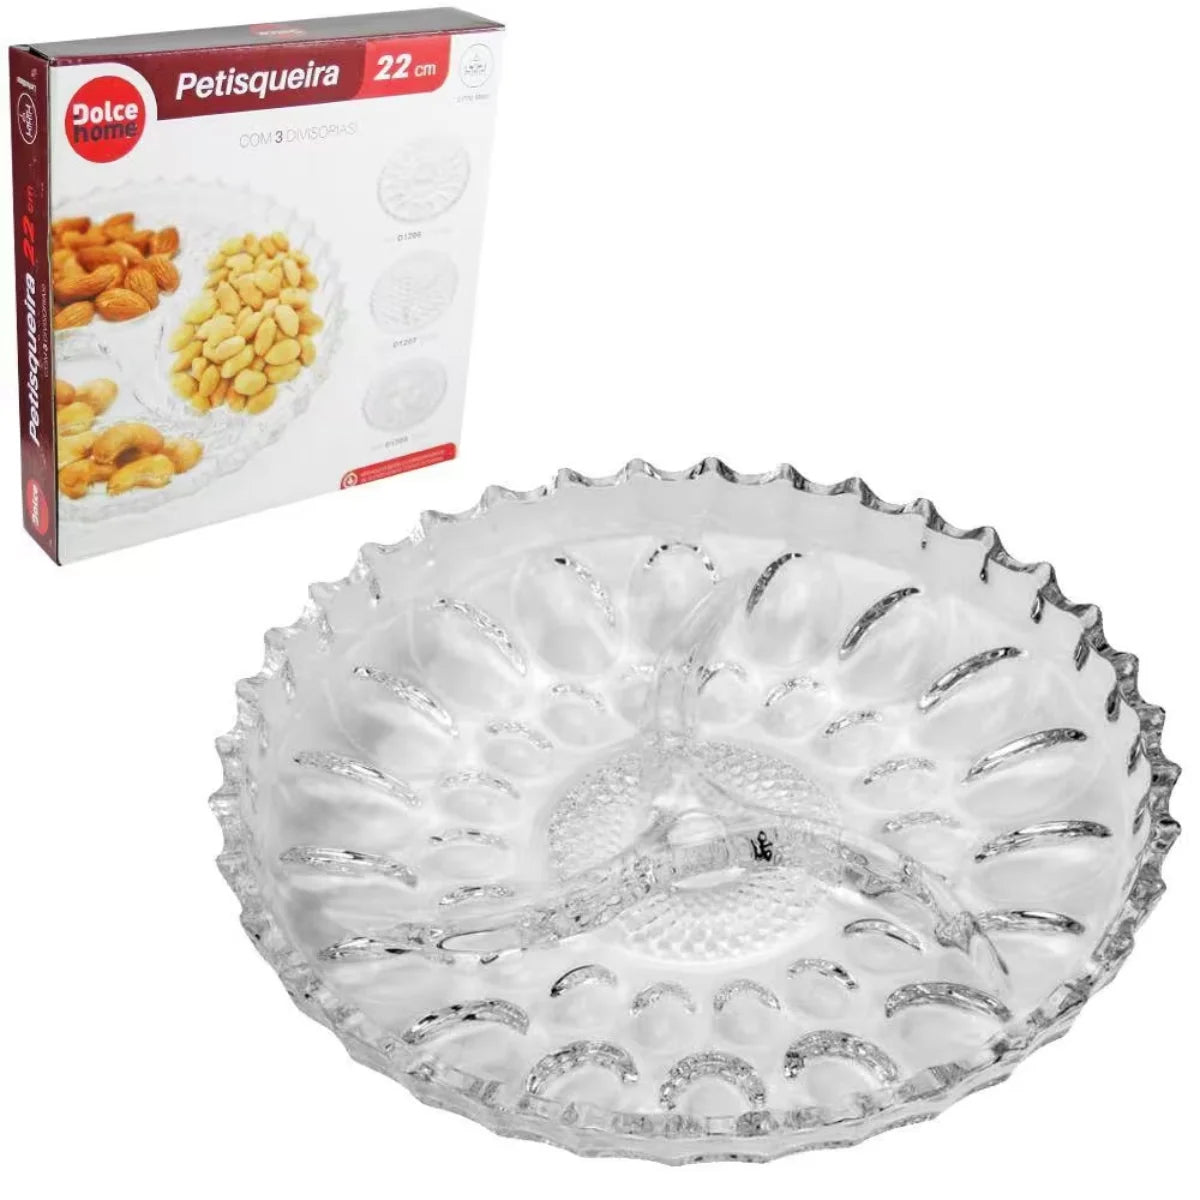 Round Media Petiser Tray With 3 Partitions Crystal Glass Dolce Home 22 Cm Item To Serve